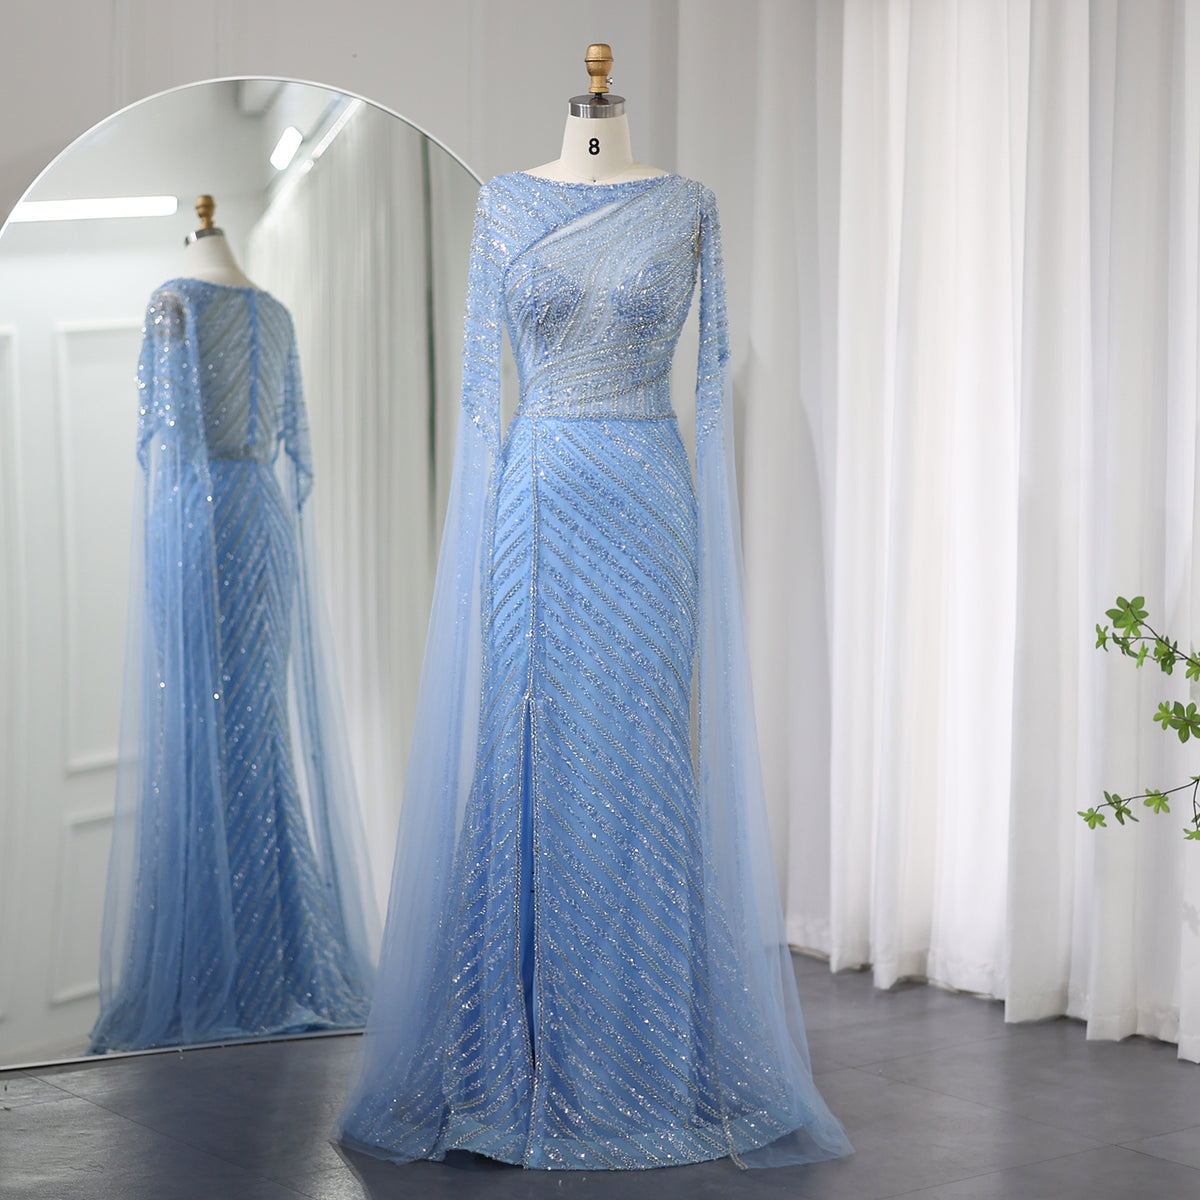 Sharon Said Arabic Mermaid Blue Dubai Evening Dress with Cape Sleeves Luxury Plus Size Women Wedding Formal Party Gowns SS087